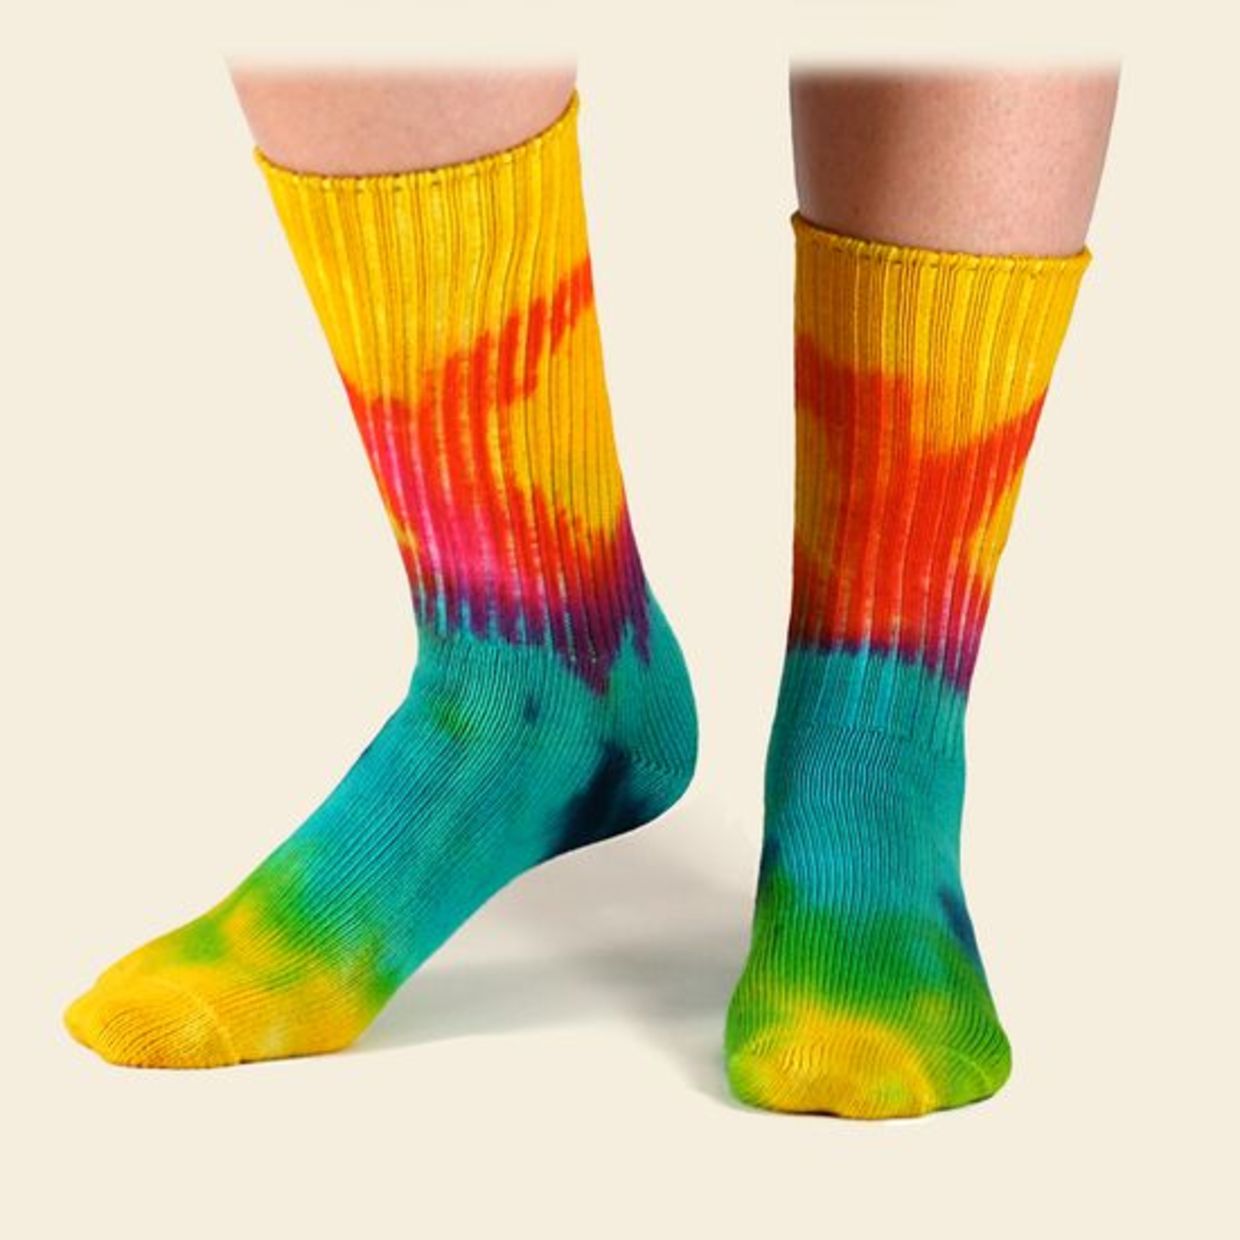 9 Awesome Socks That Support Some Amazing Causes - Goodnet